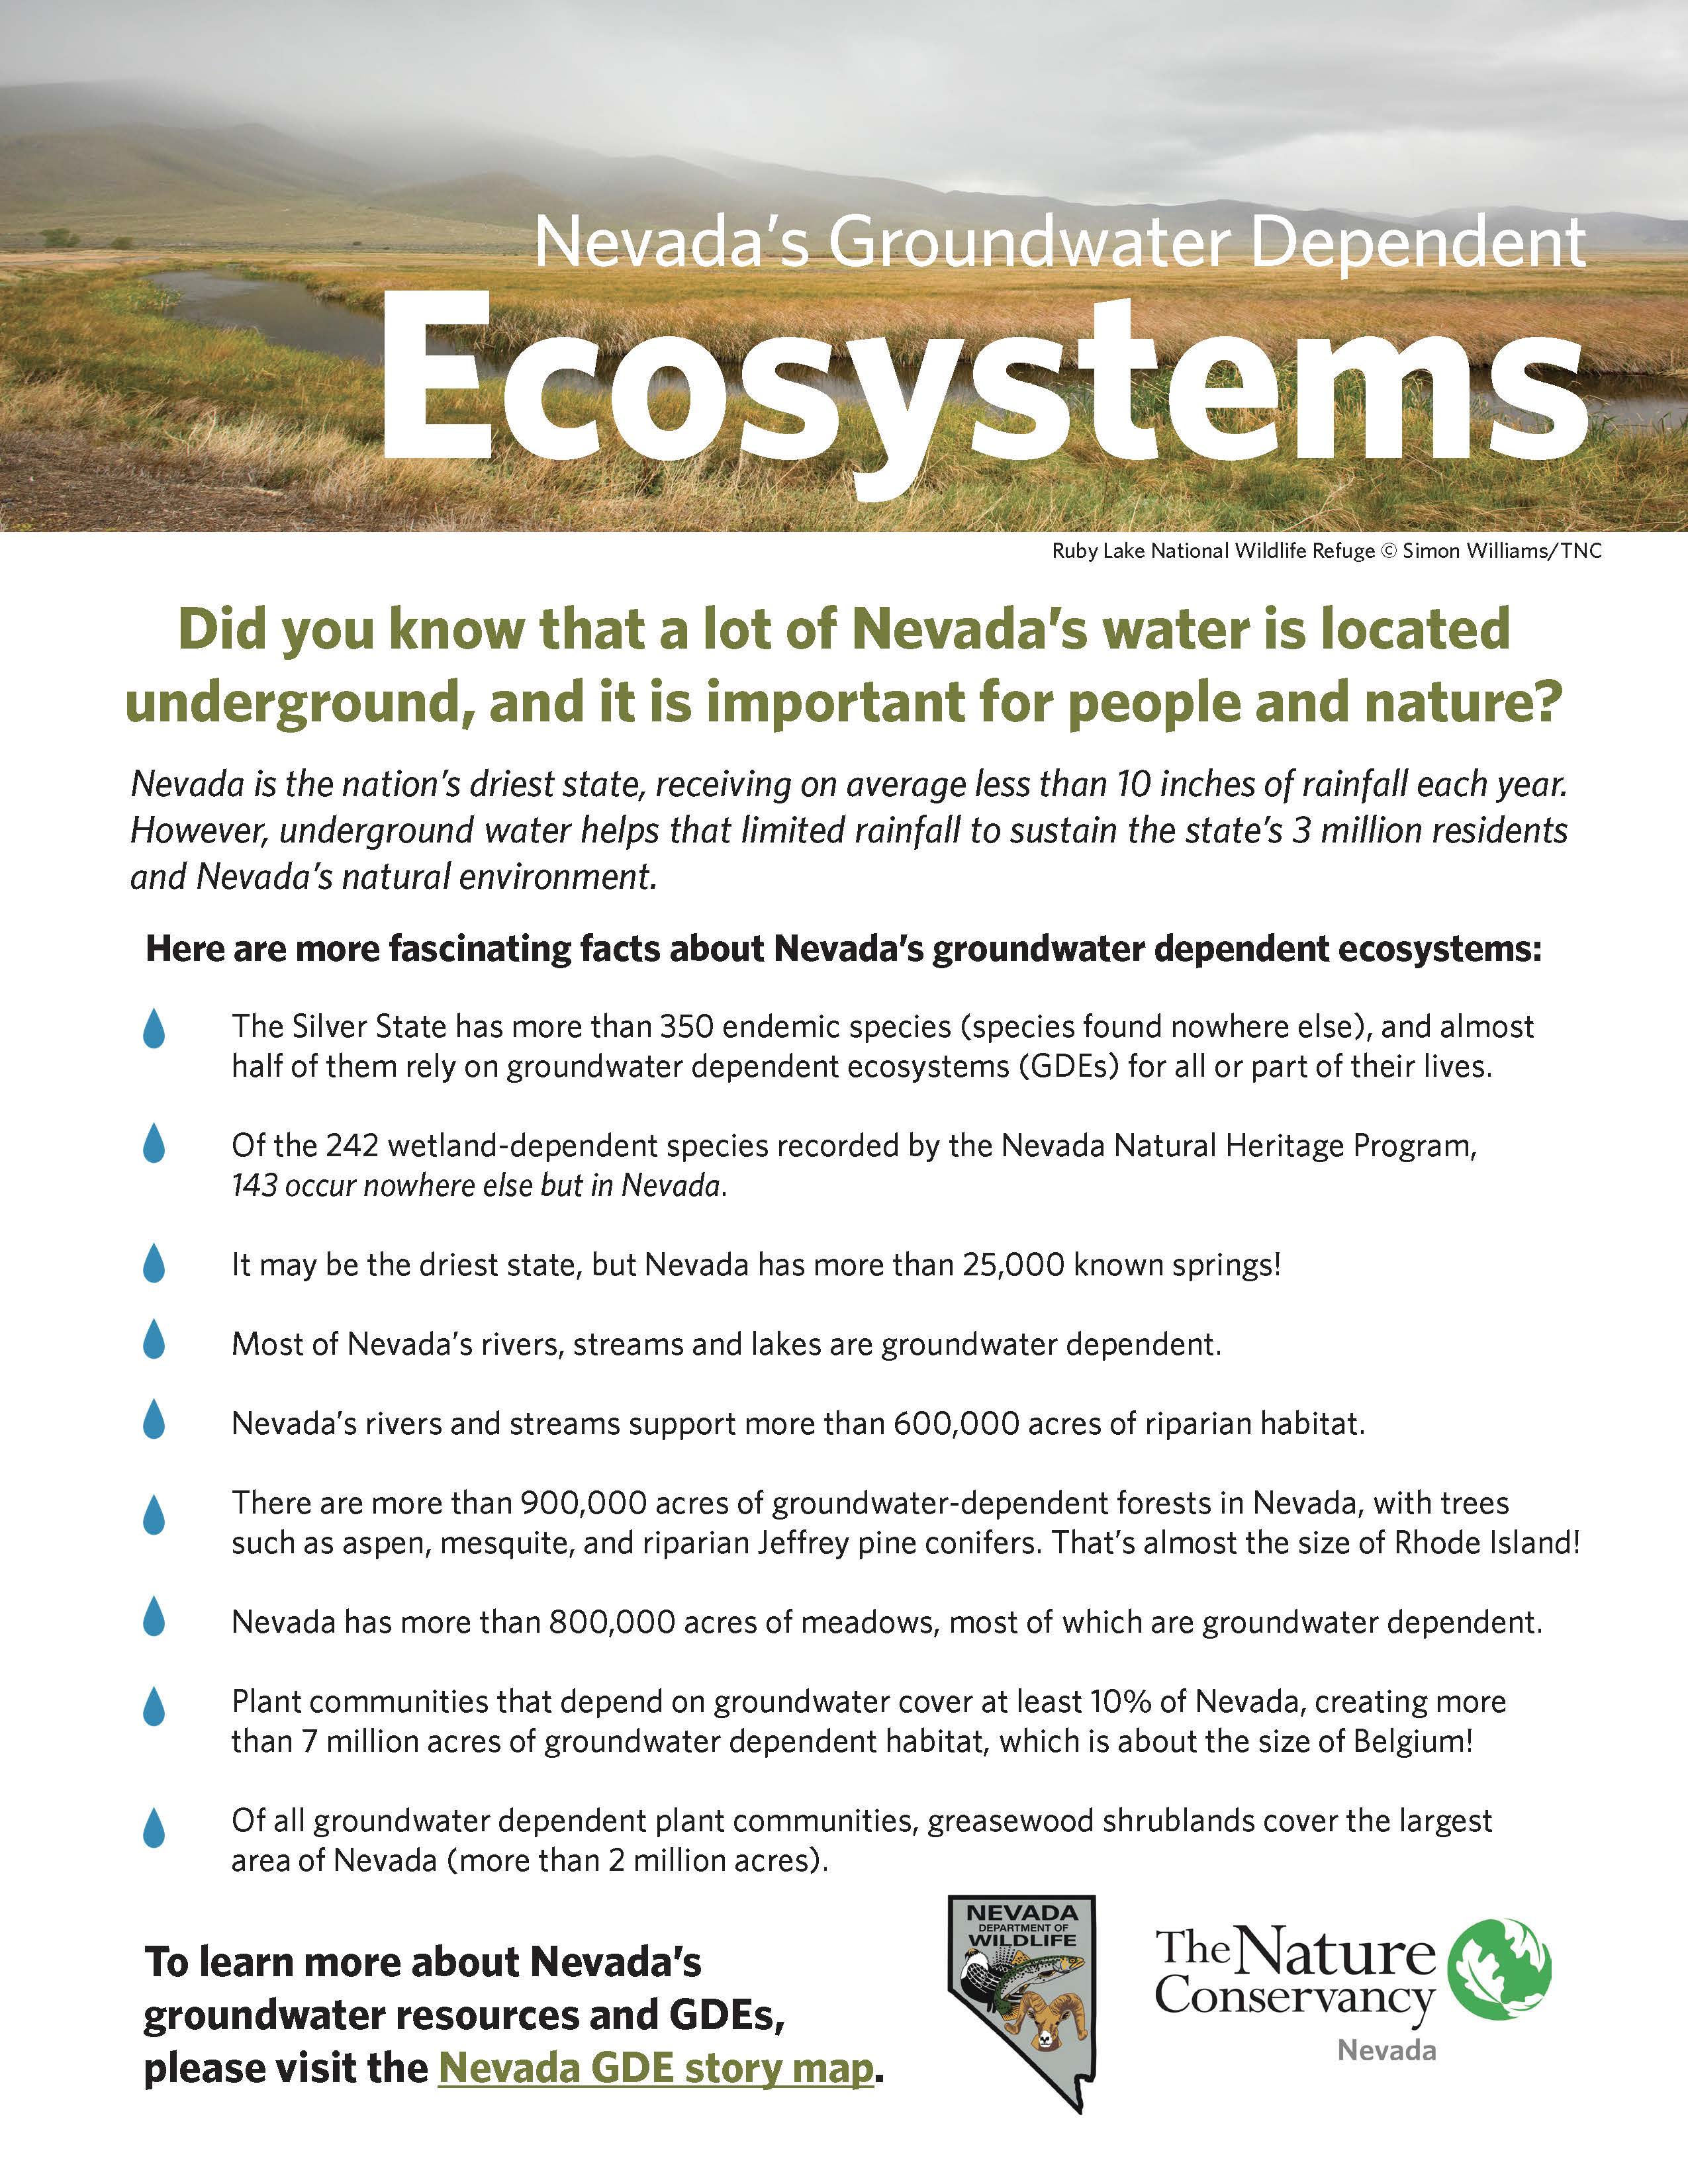 Fact sheet for Nevada iGDE database and story map